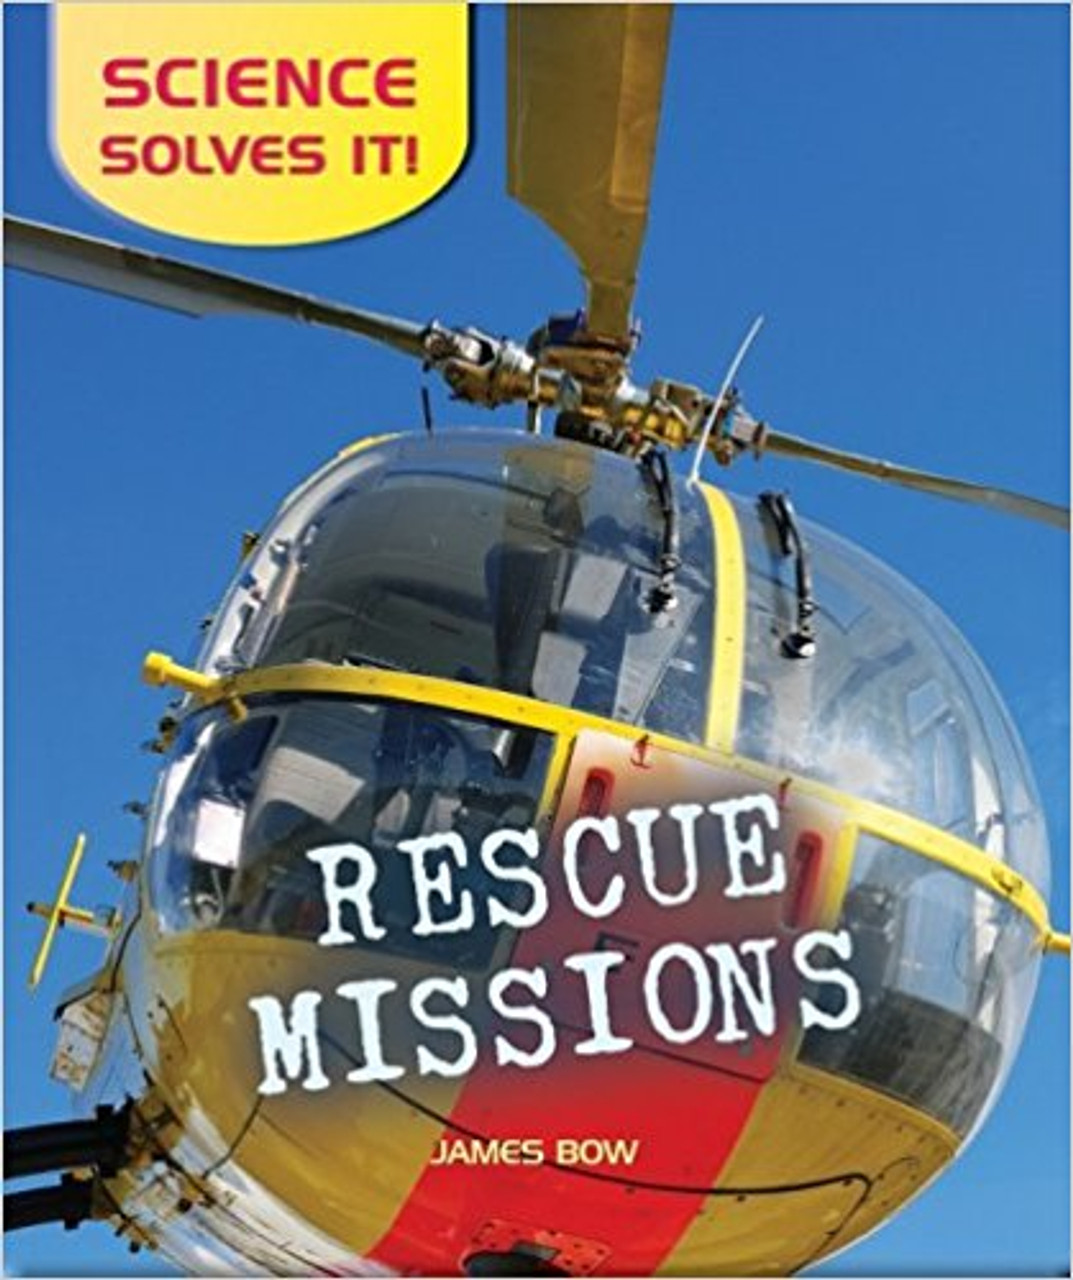 Rescue Missions by James Bow